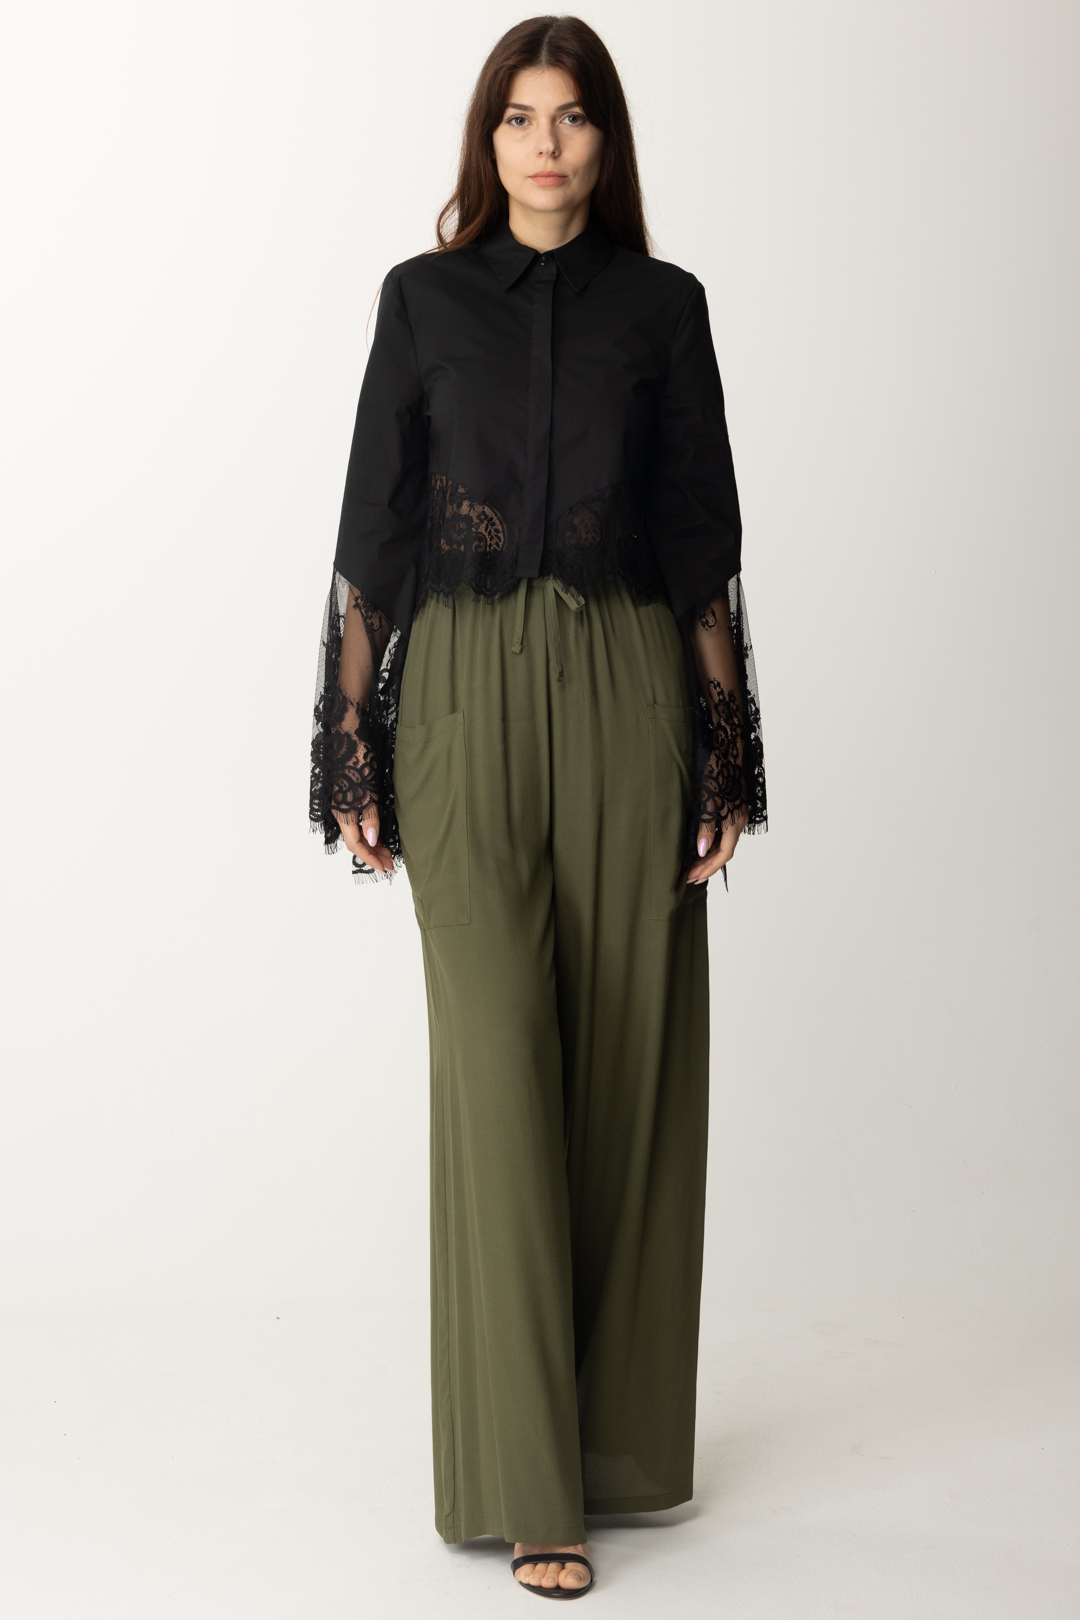 Preview: Aniye By Oversized Drawstring Janis Pants ARMY